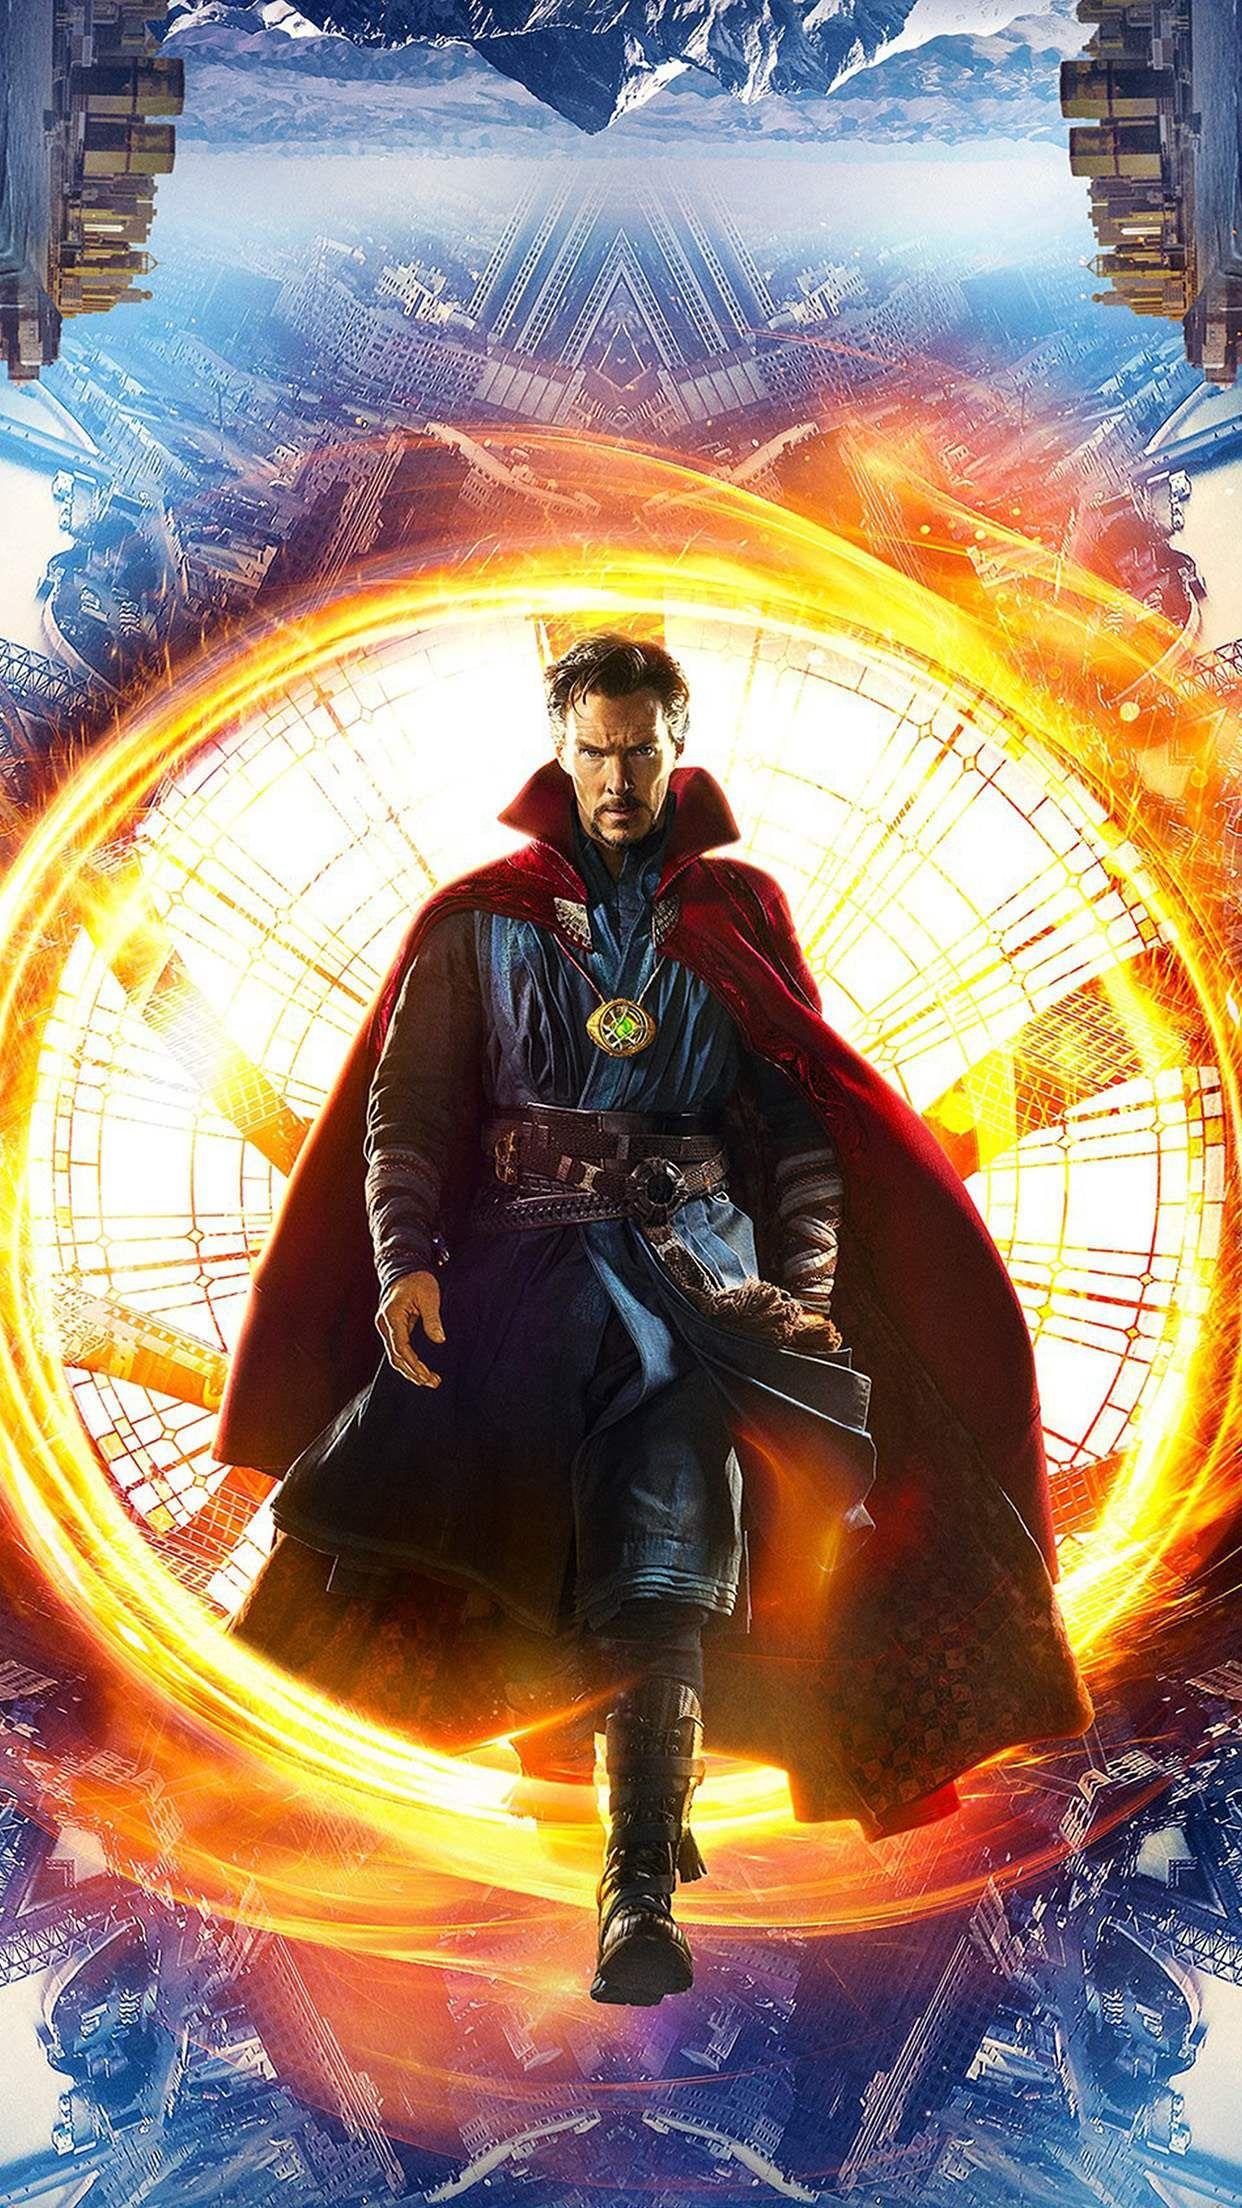 Download Mega Collection of Cool iPhone Wallpaper. Doctor strange poster, Doctor strange, Doctor strange marvel